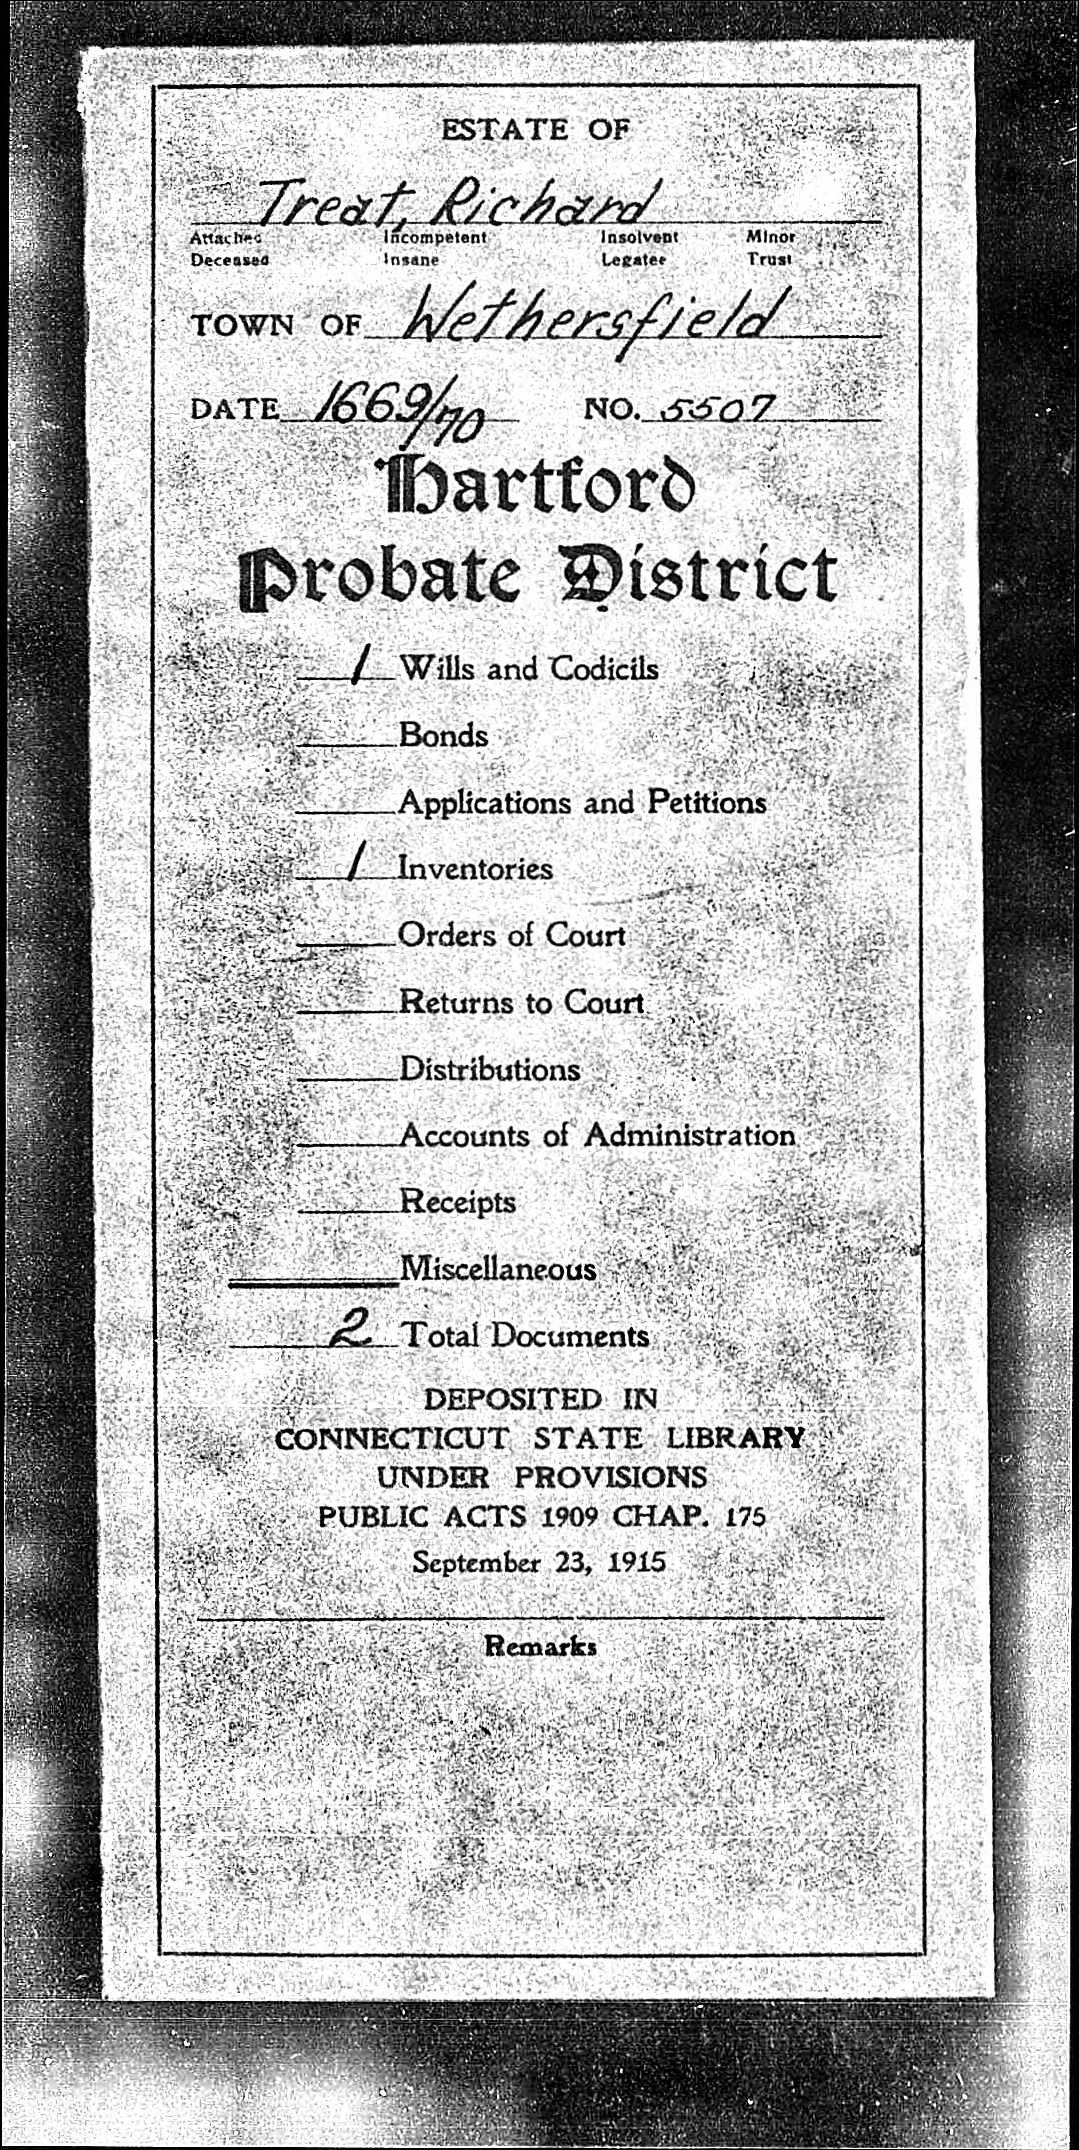 Cover page of Richard Treat's probate records